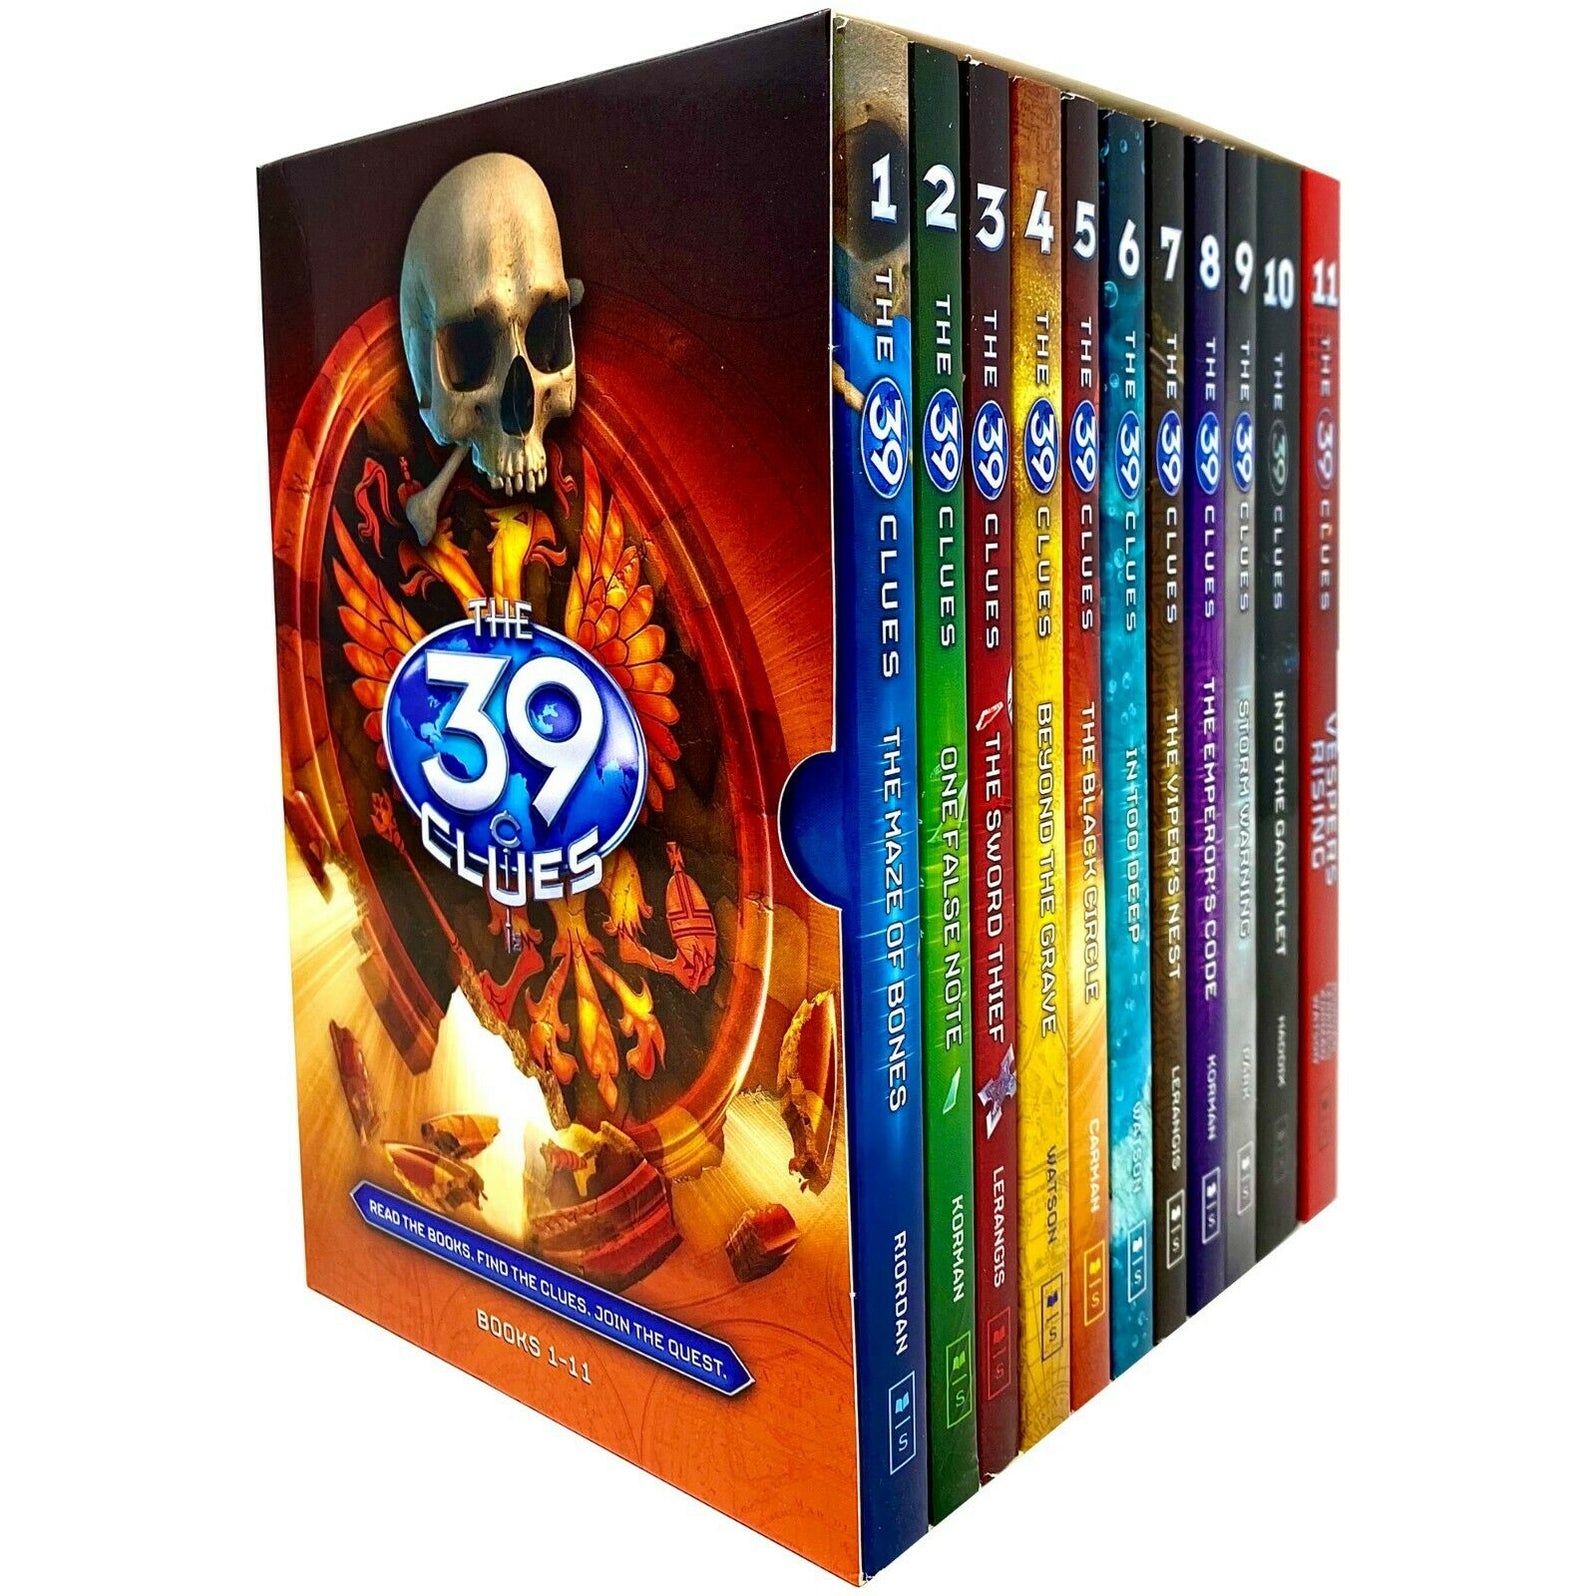 39 clues book review